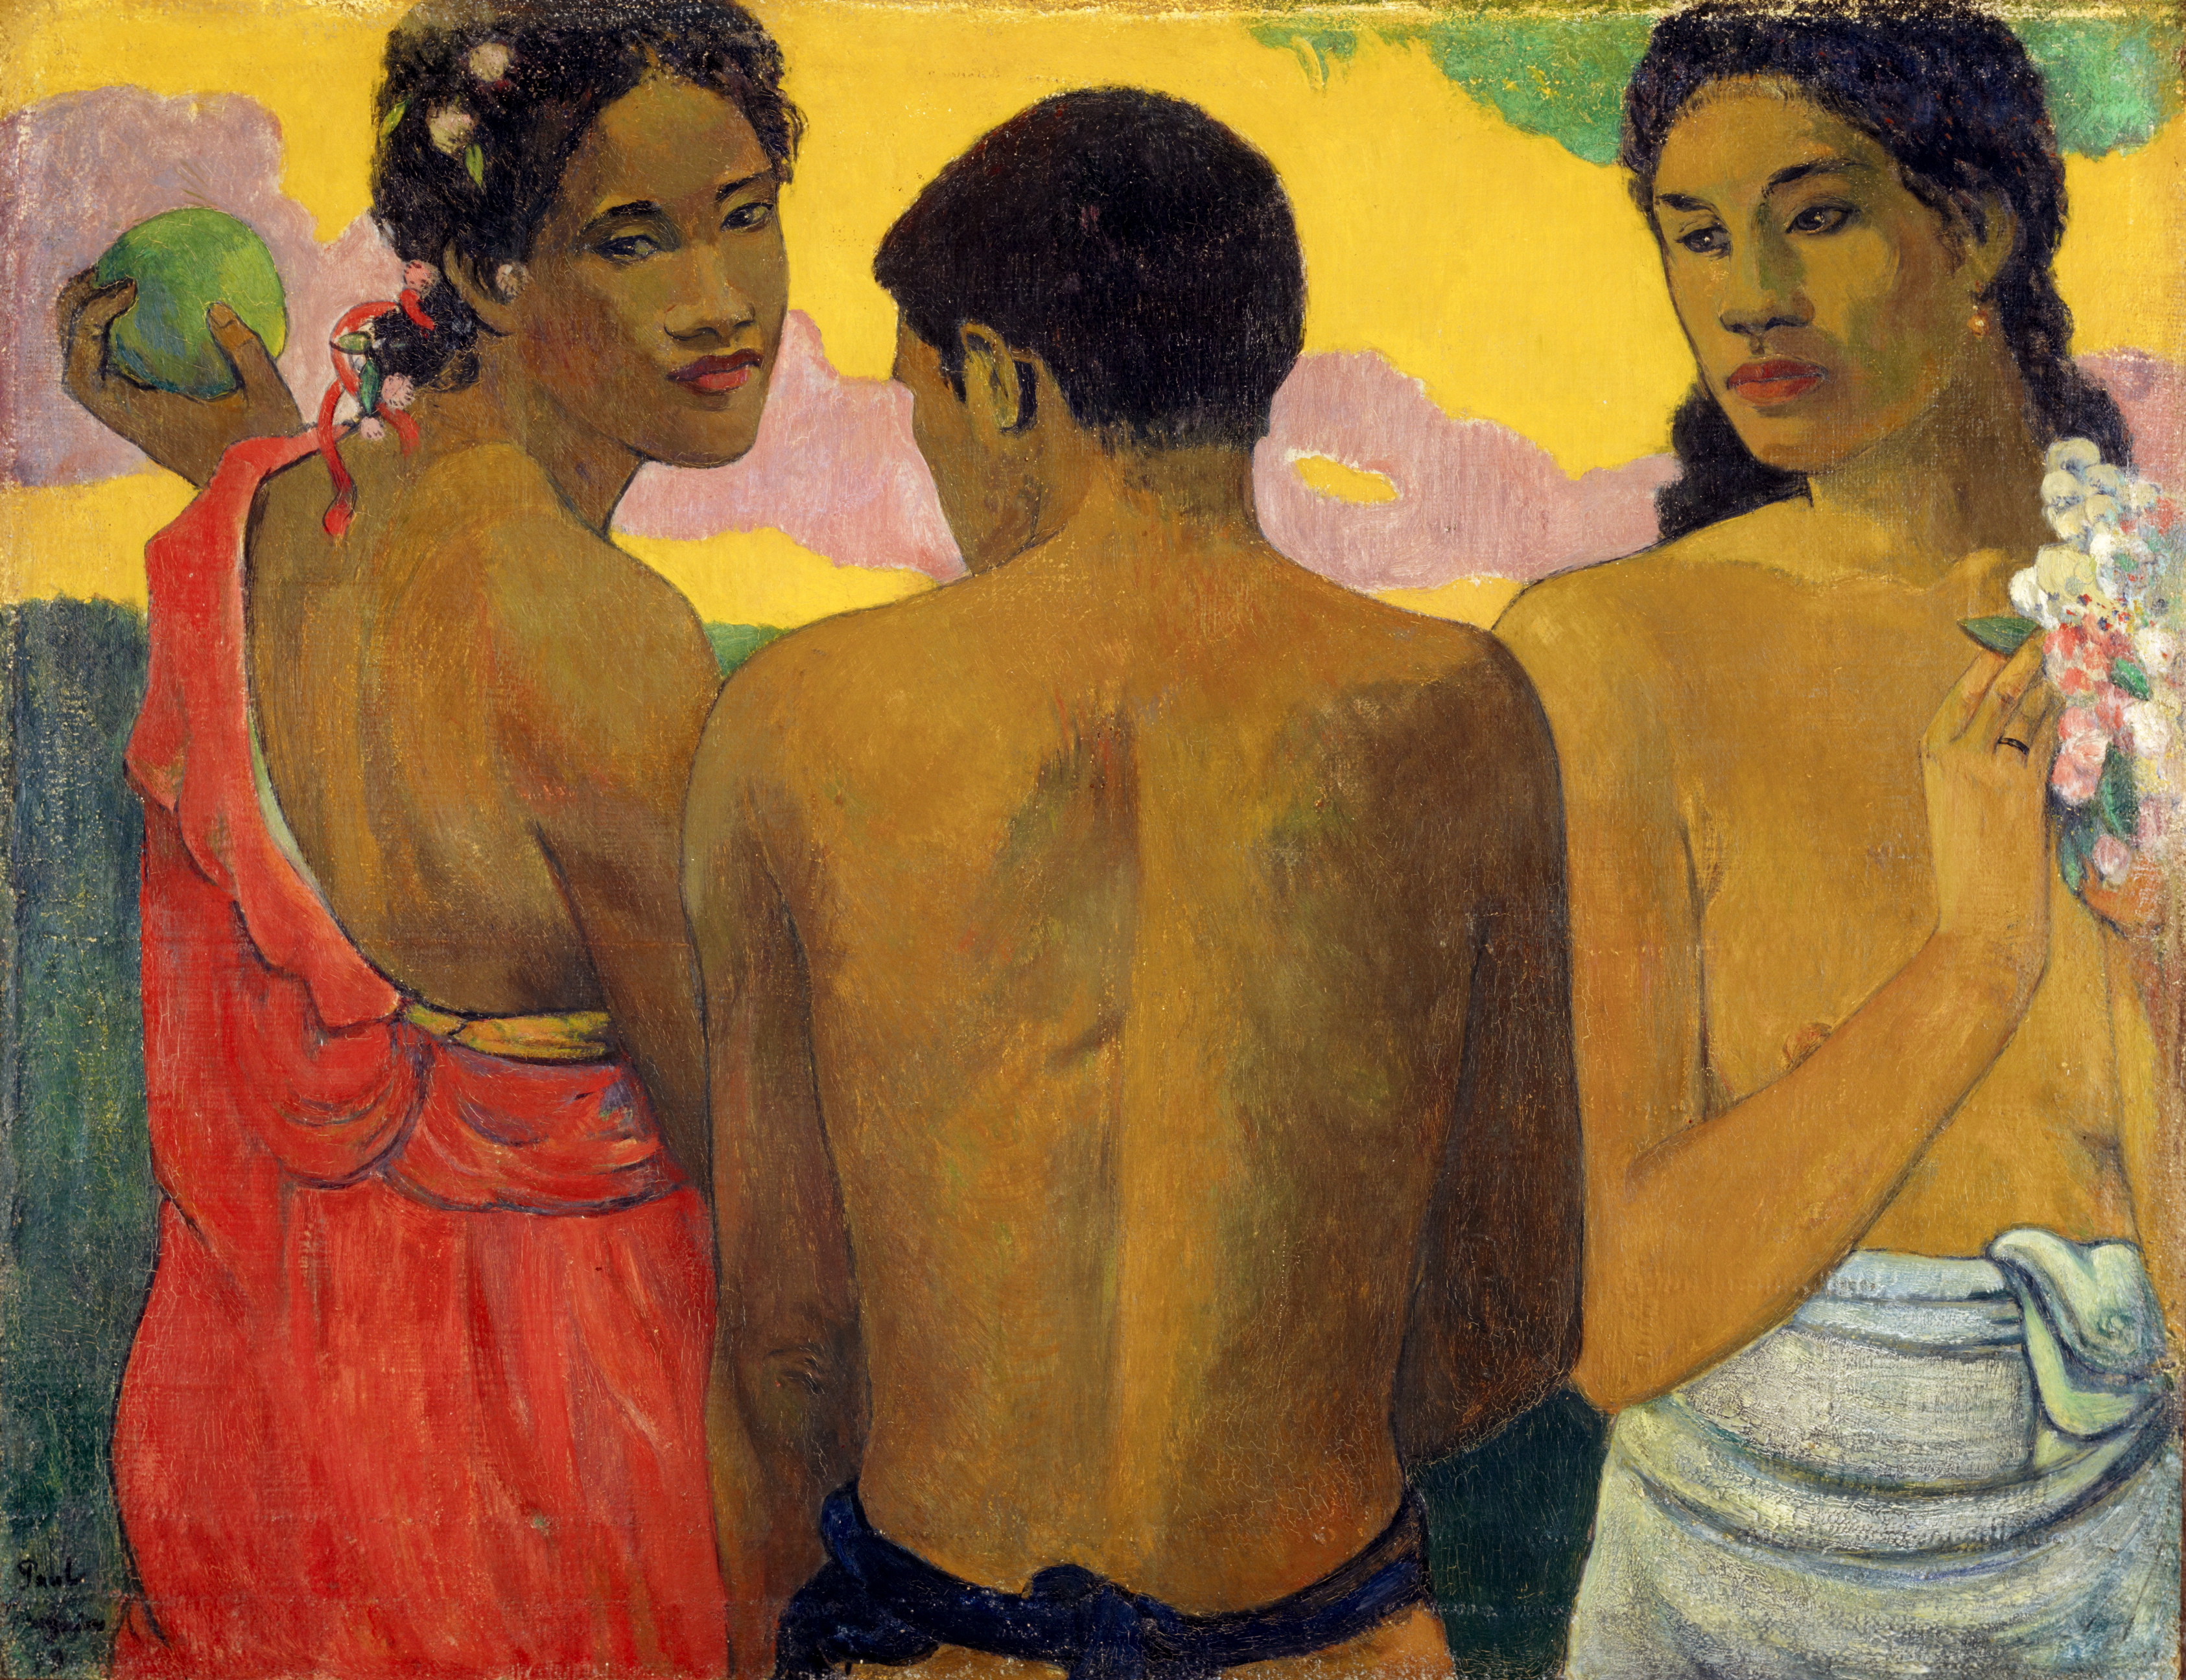 Paul Gauguin Three Tahitians 1899 oil on canvas 73 x 94 cm Scottish National Gallery, Edinburgh © Trustees of the National Galleries of Scotland ***This image may only be used in conjunction with editorial coverage of The Greats exhibition, 24 Oct 2015 - 14 Feb 2016, at the Art Gallery of New South Wales. This image may not be cropped or overwritten. Prior approval in writing required for use as a cover. Caption details must accompany reproduction of the image. *** Media contact: Lisa.Catt@ag.nsw.gov.au *** Local Caption *** ***This image may only be used in conjunction with editorial coverage of The Greats exhibition, 24 Oct 2015 - 14 Feb 2016, at the Art Gallery of New South Wales. This image may not be cropped or overwritten. Prior approval in writing required for use as a cover. Caption details must accompany reproduction of the image. *** Media contact: Lisa.Catt@ag.nsw.gov.au